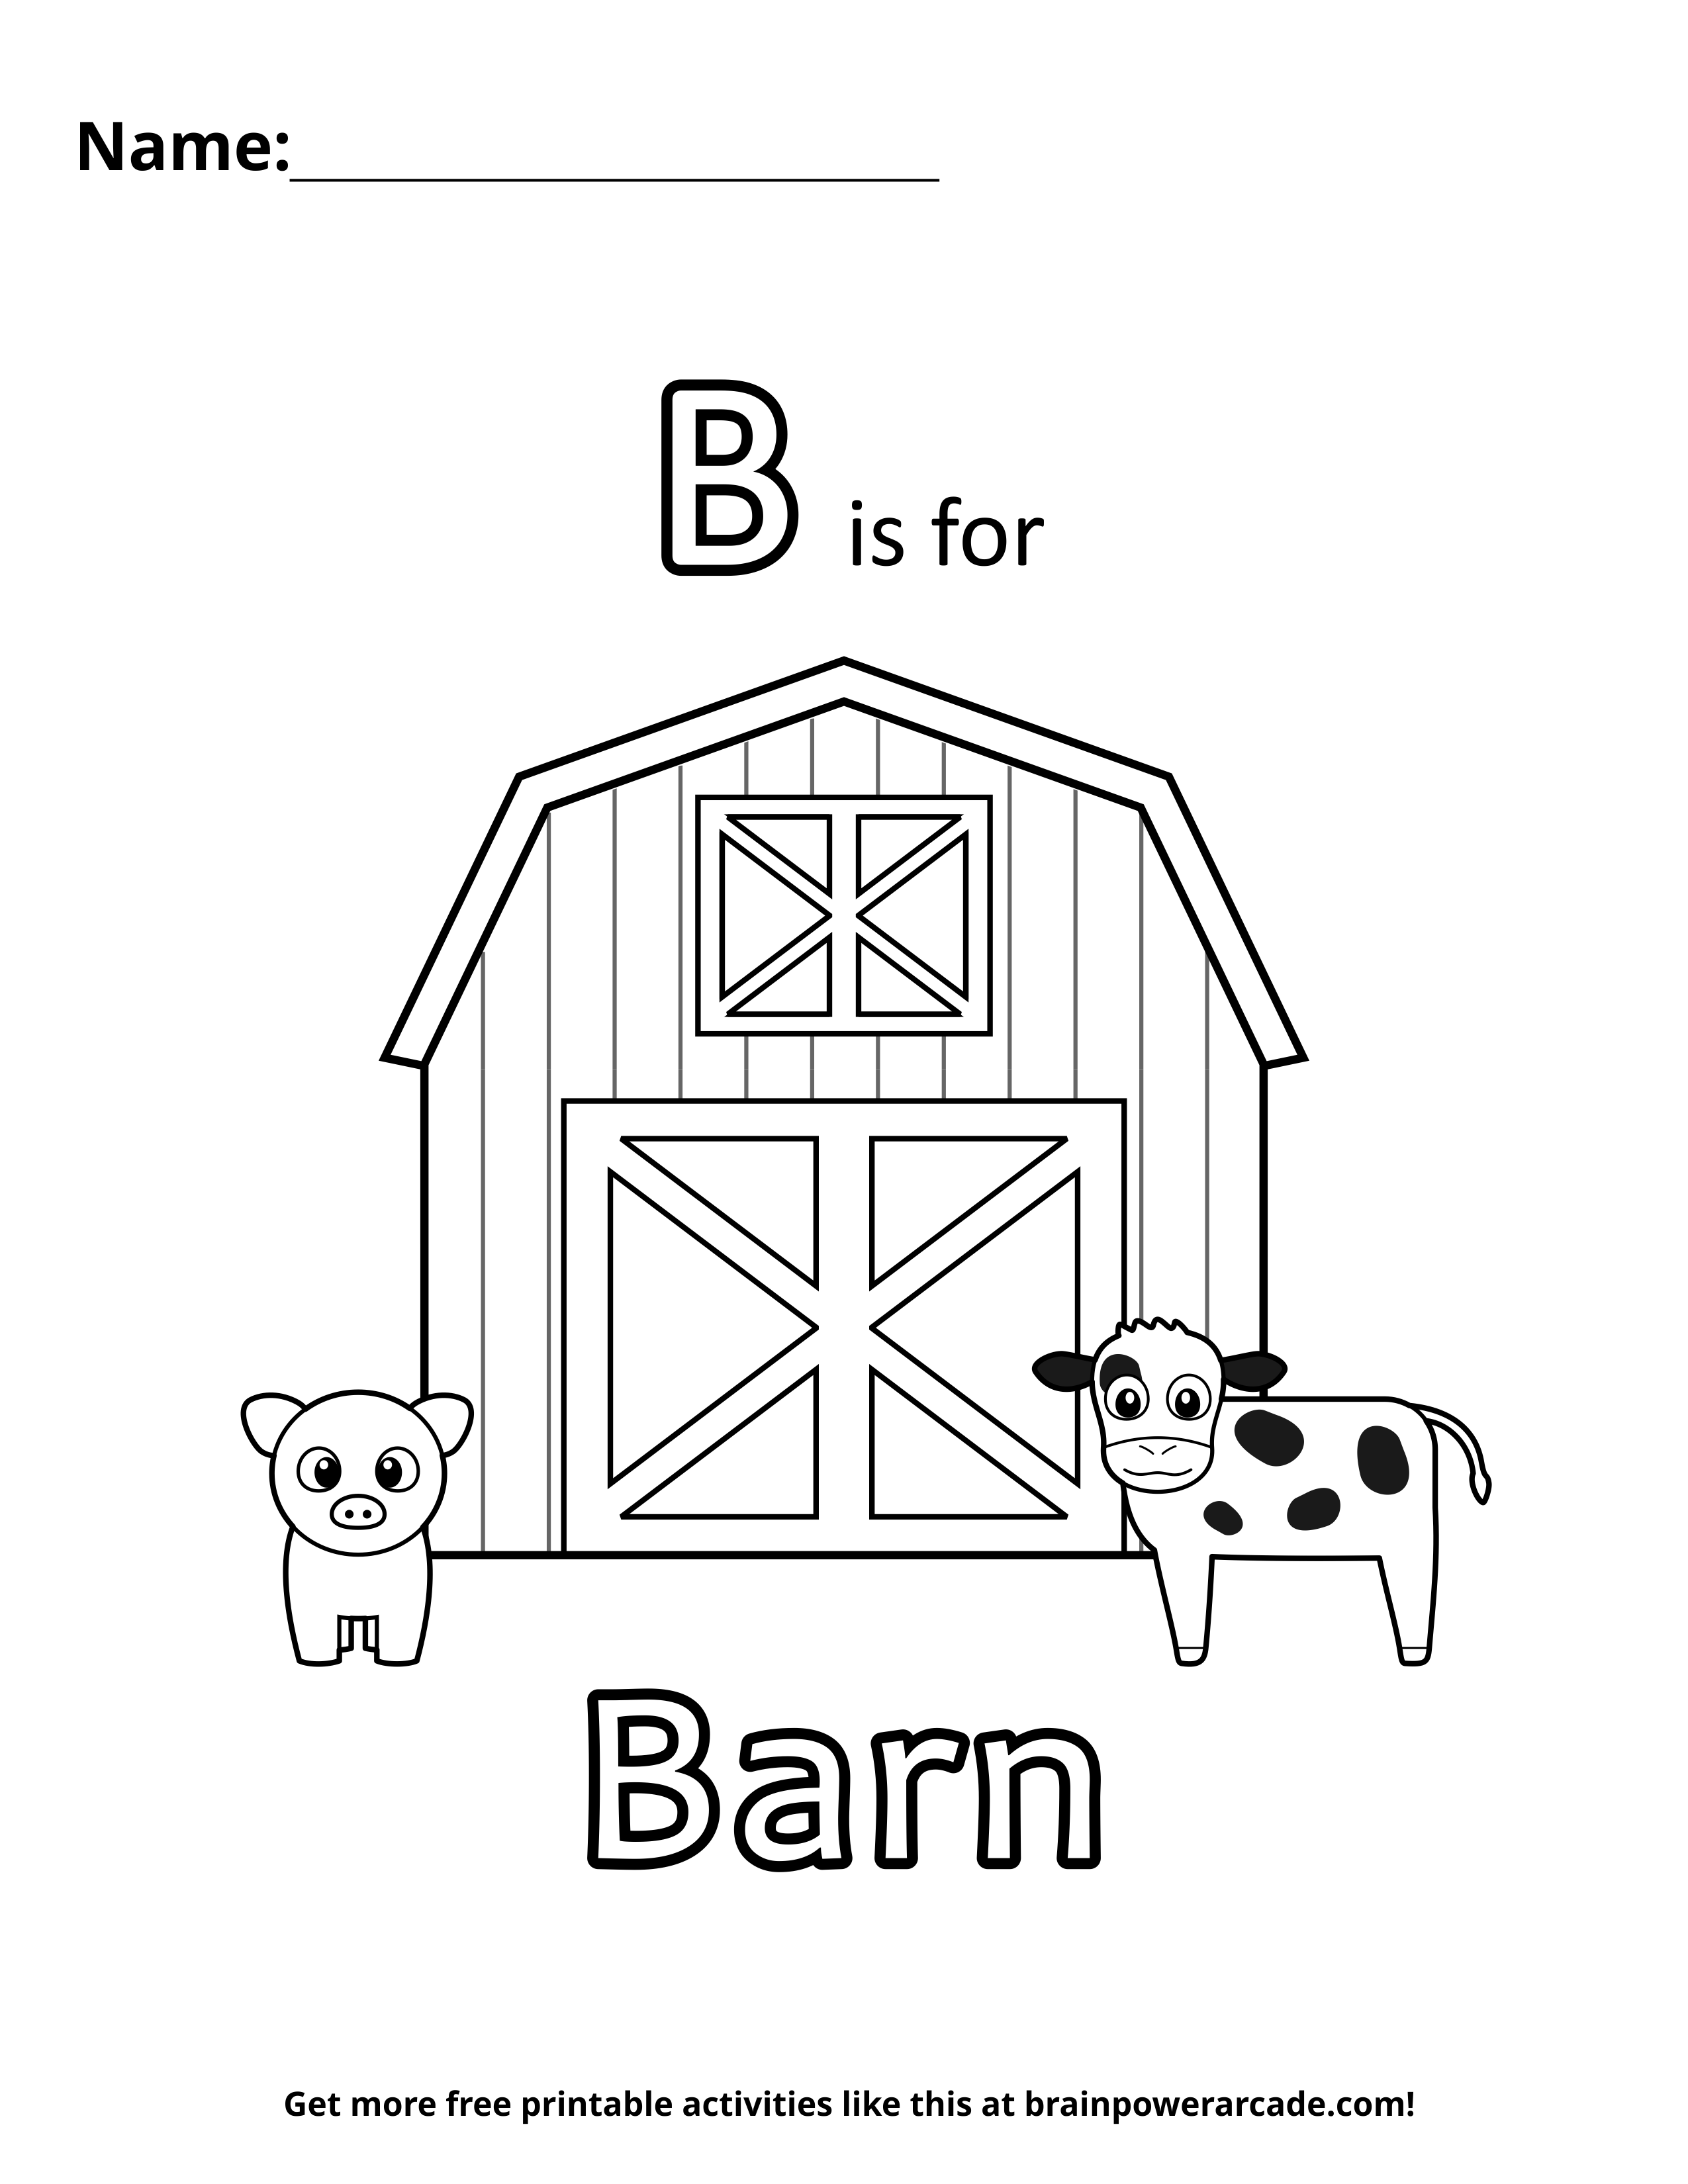 B is for Barn Coloring Page